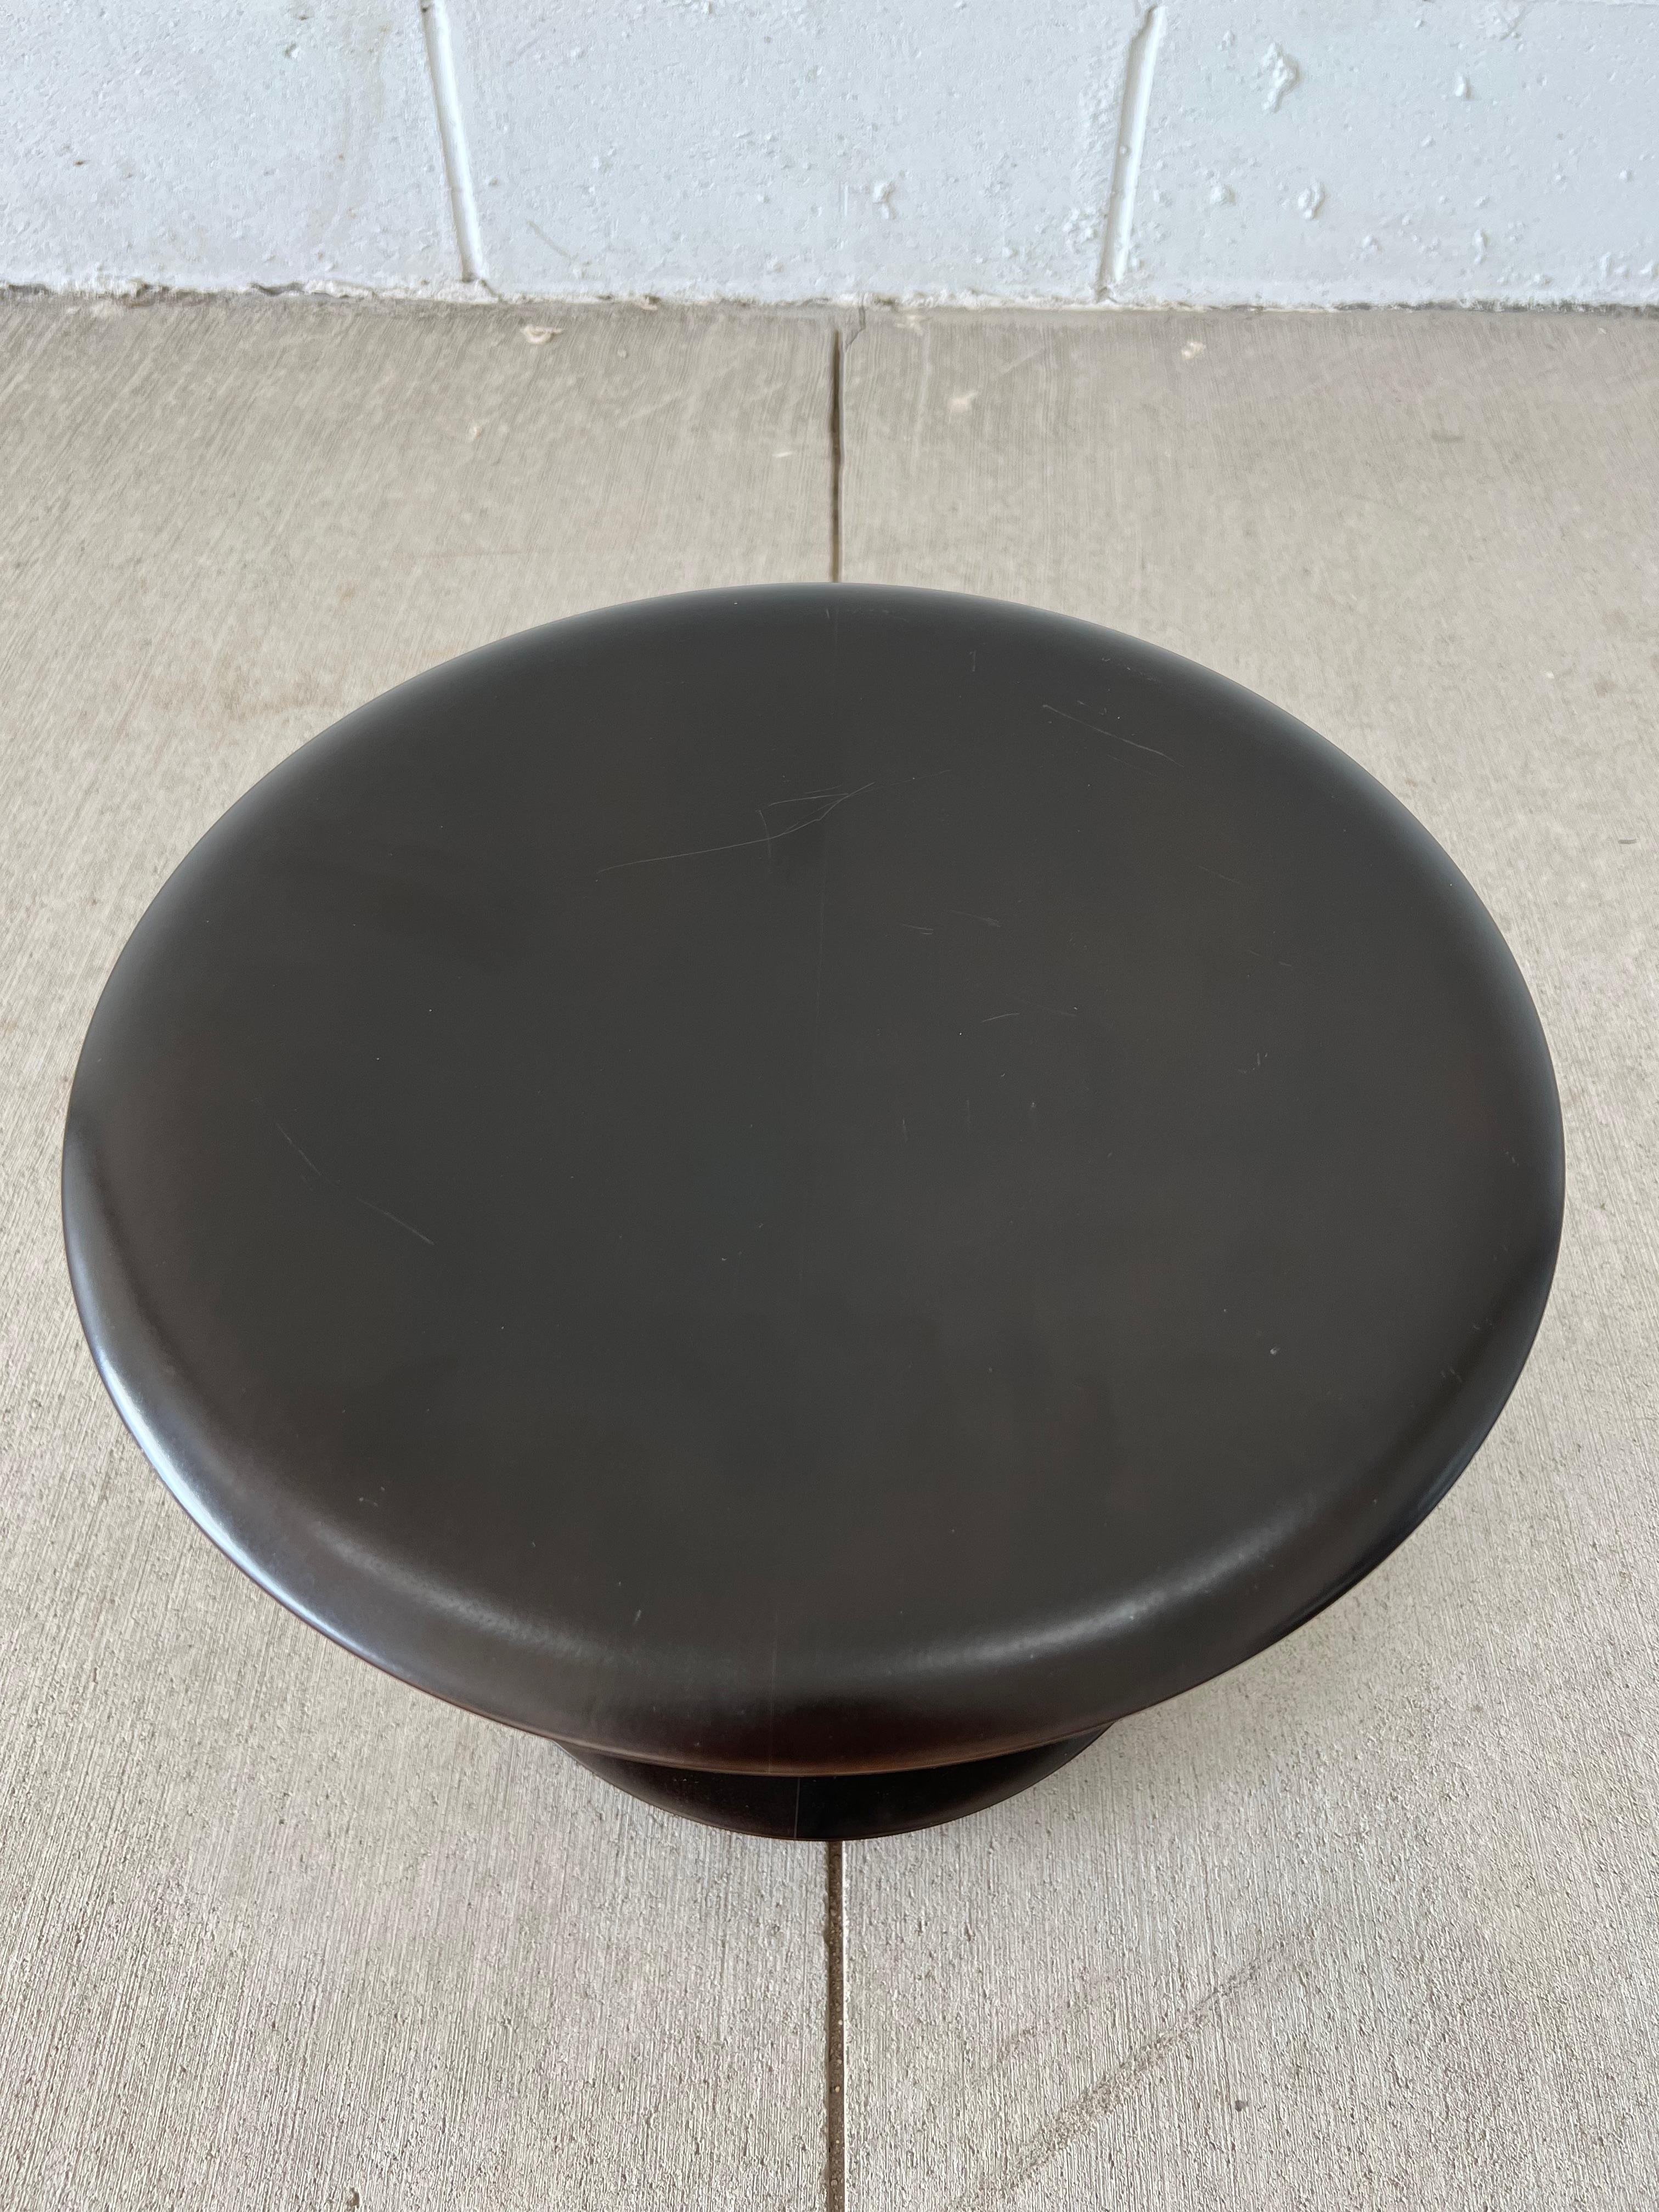 Isamu Noguchi iconic rocking stool in dark stained wood with polished chrome accents, 14” diameter x 10”high. Vitra production. Blonde wood stool is available in a separate listing.